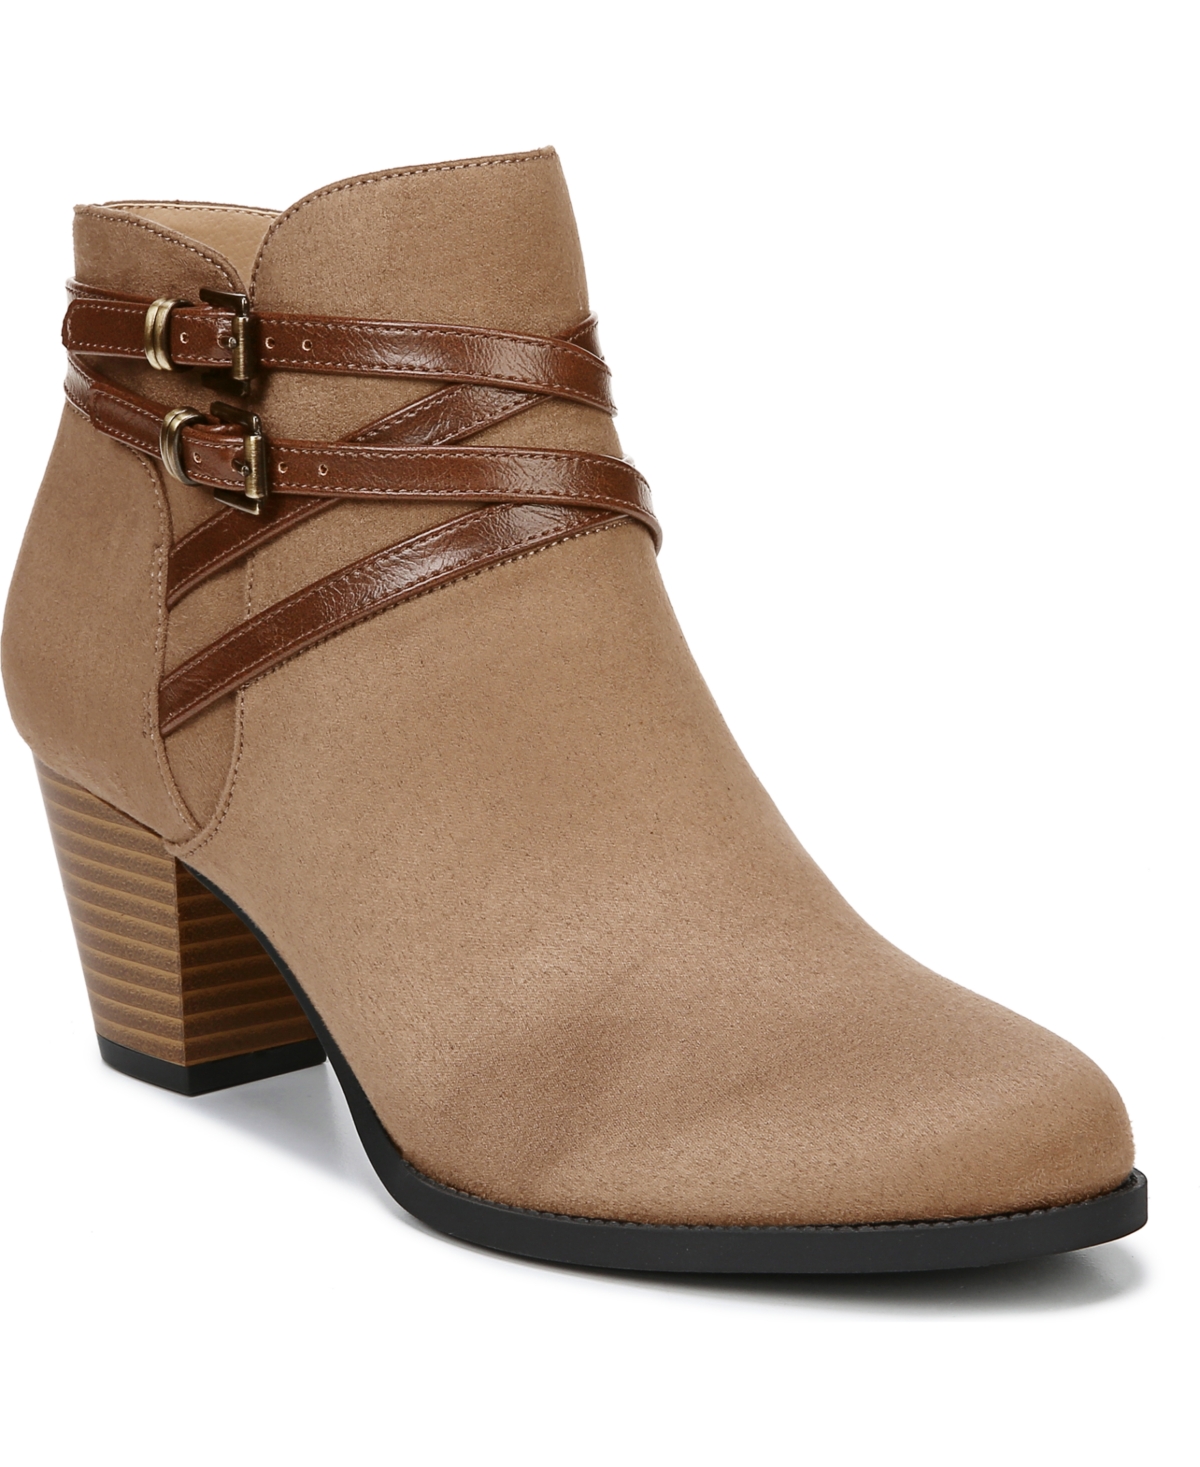 Jezebel Booties - Tan Fabric/Faux Leather